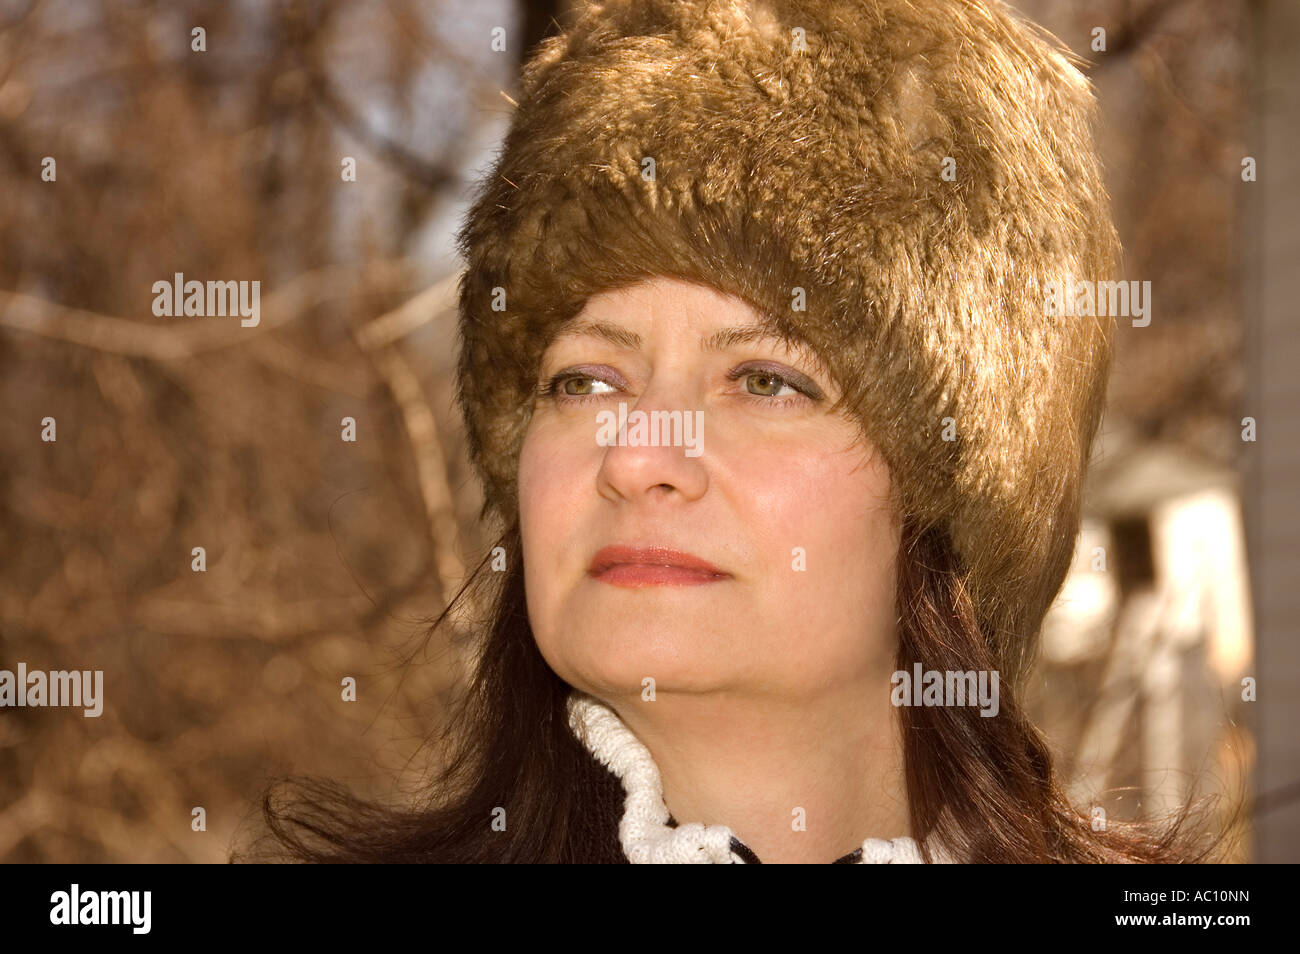 Young woman with a fur hat Stock Photo